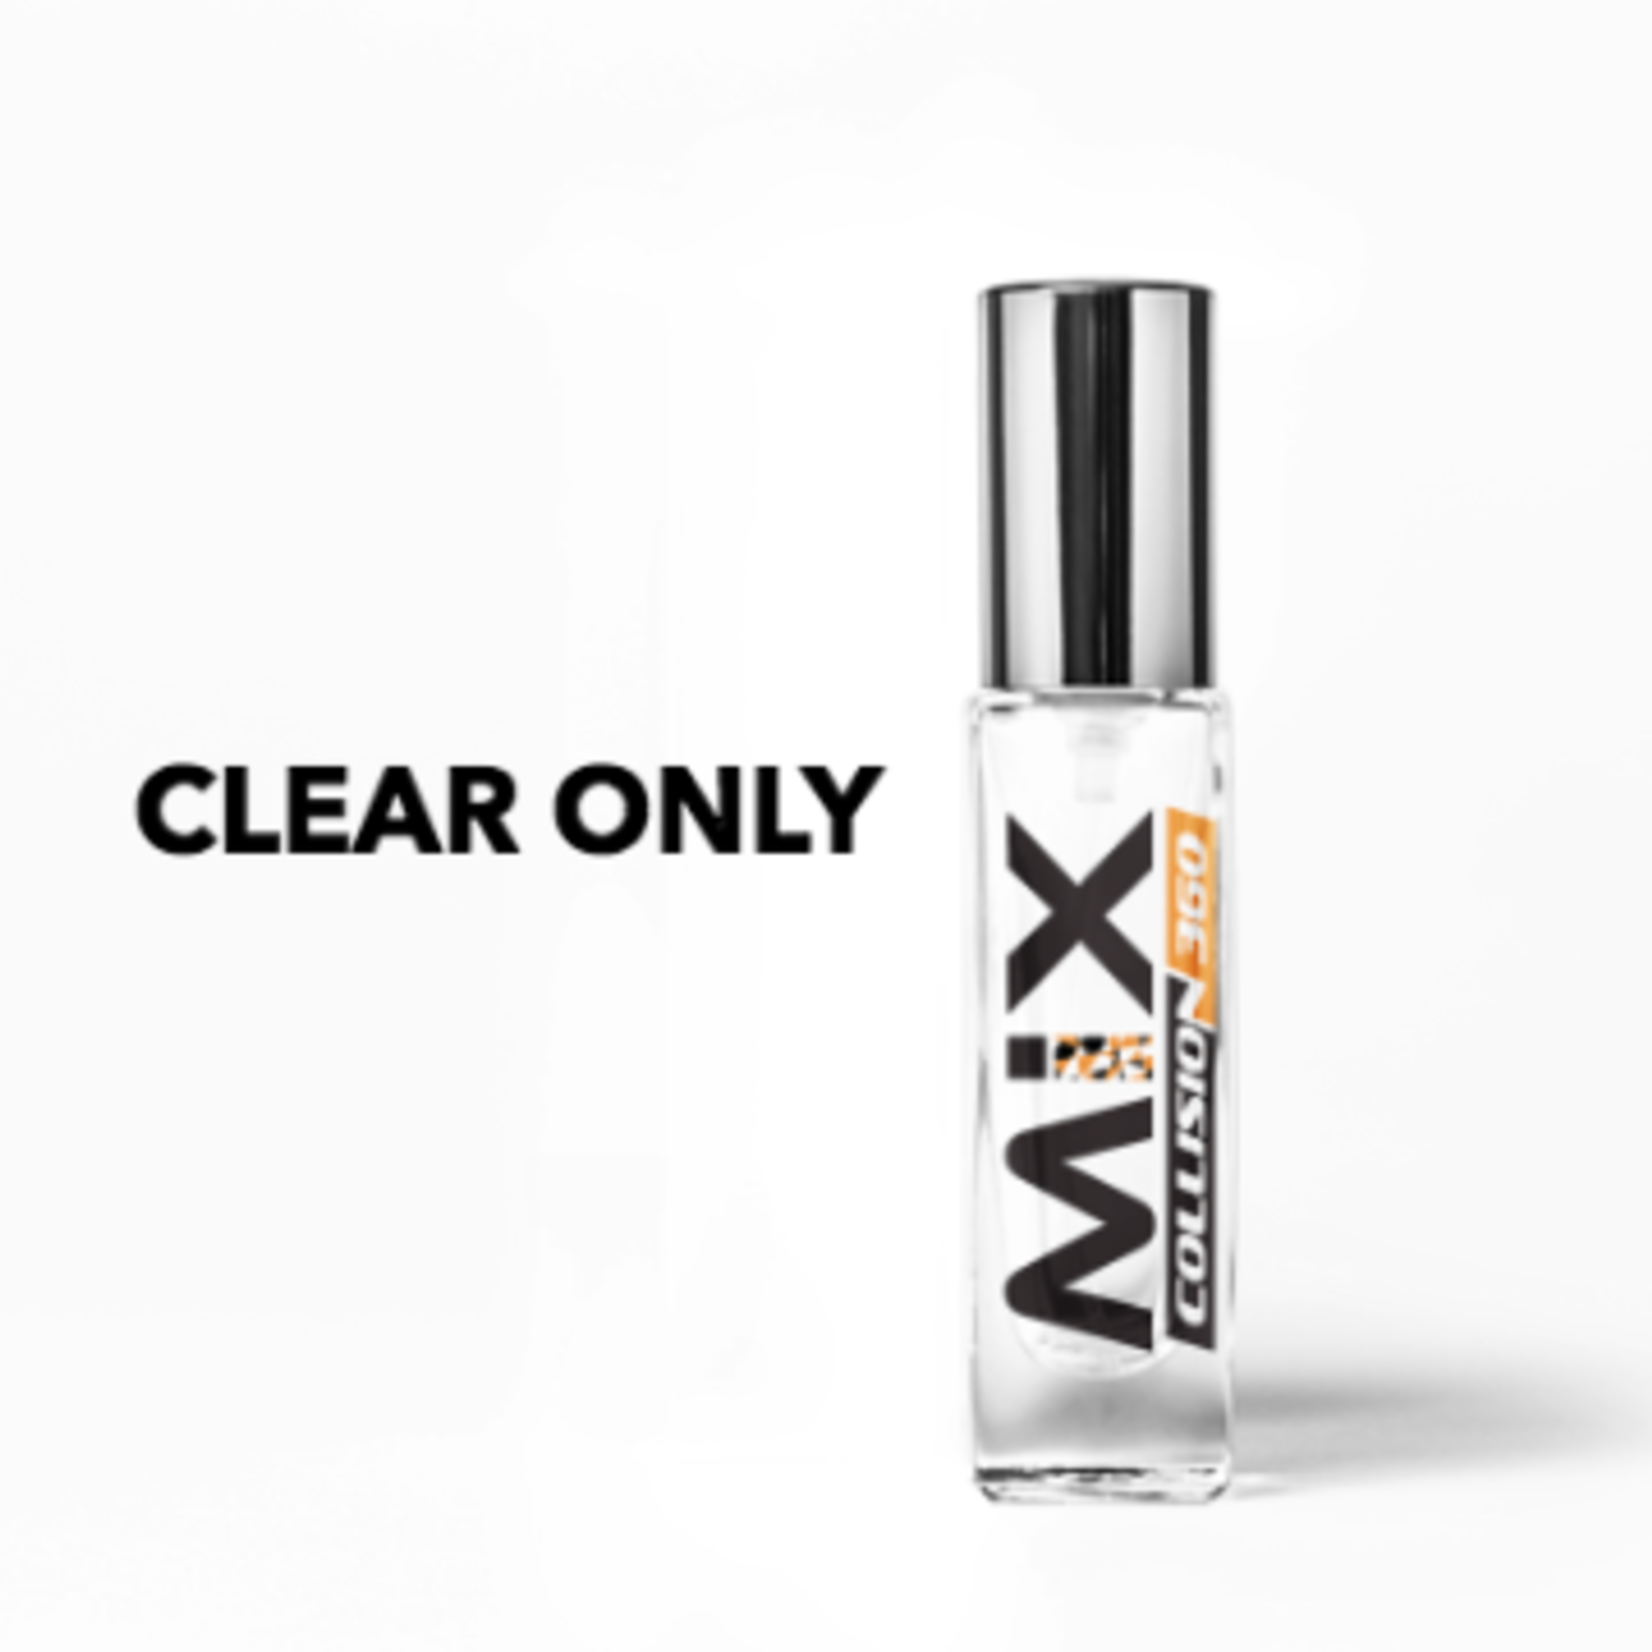 360 360 Mix Touch Up Clear, Bottle (2oz)